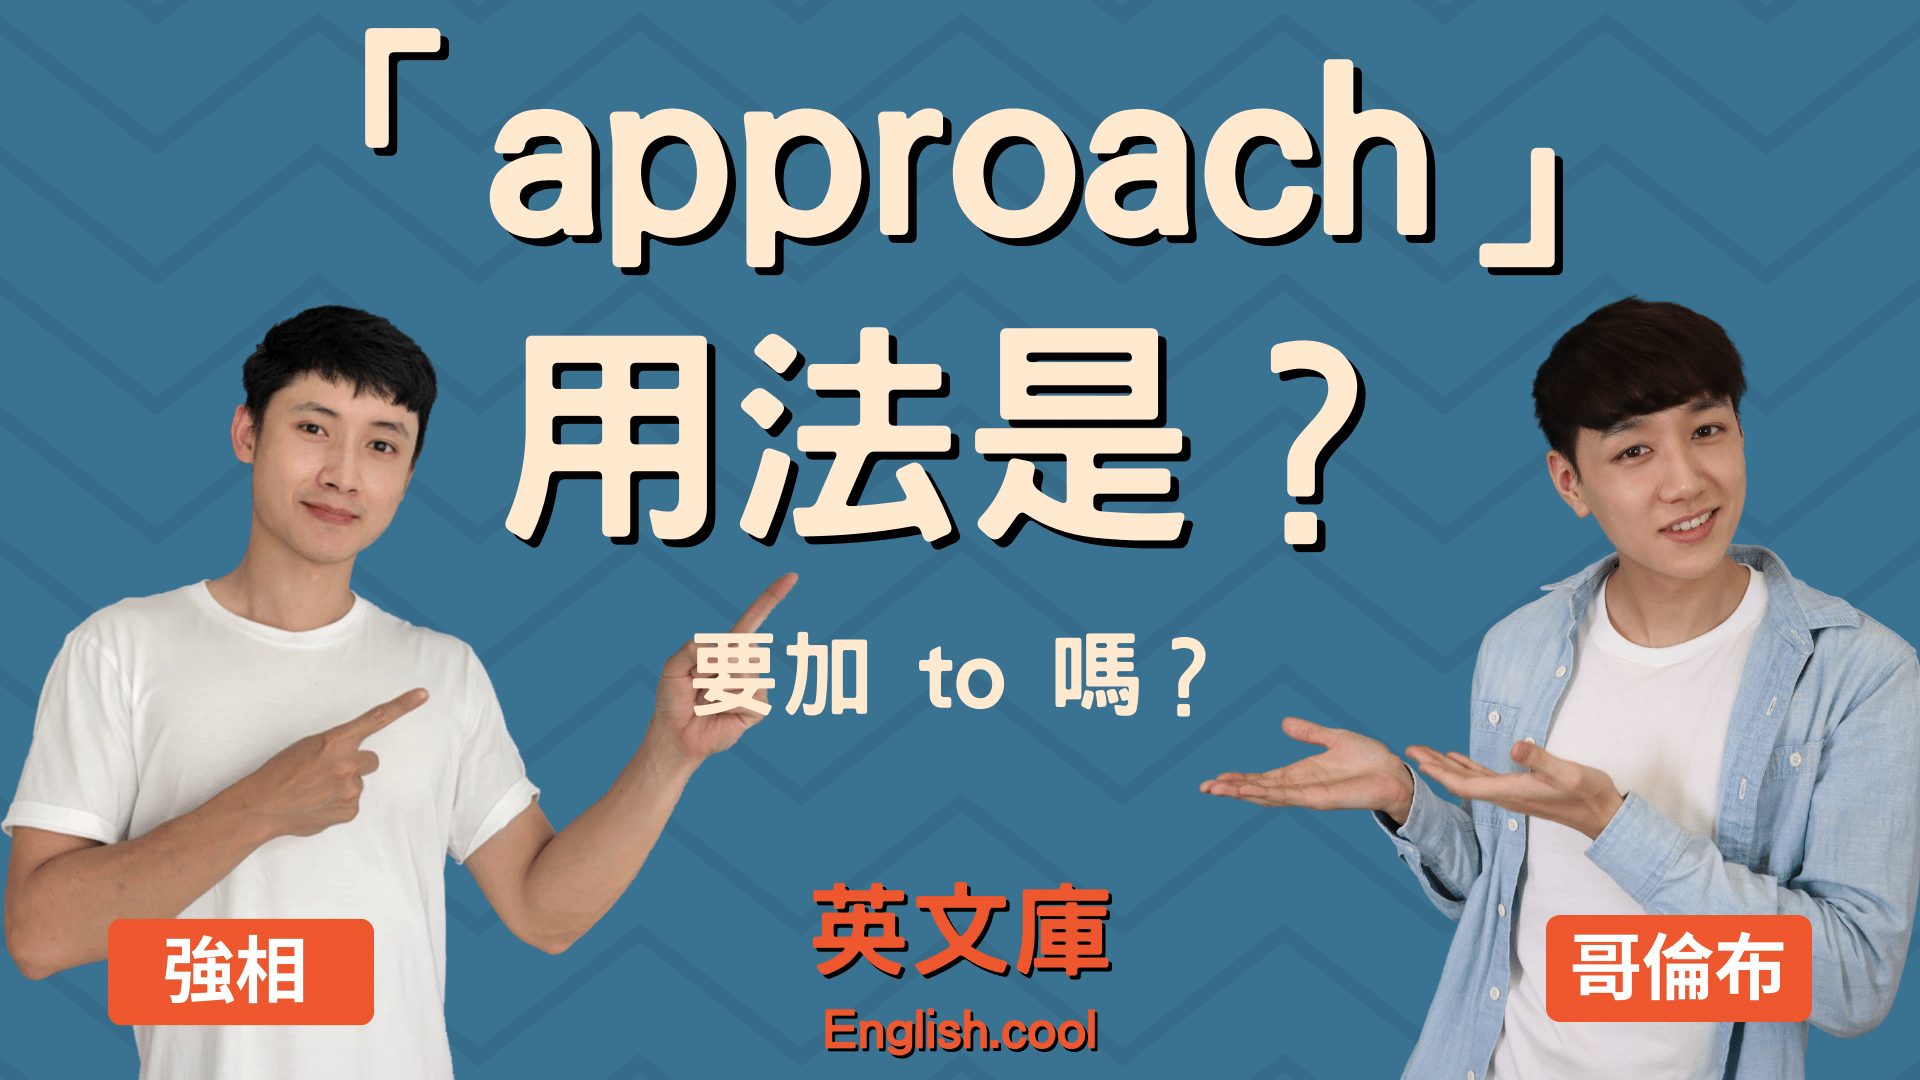 You are currently viewing 「approach」用法是？後面要加 to 嗎？來看例句！